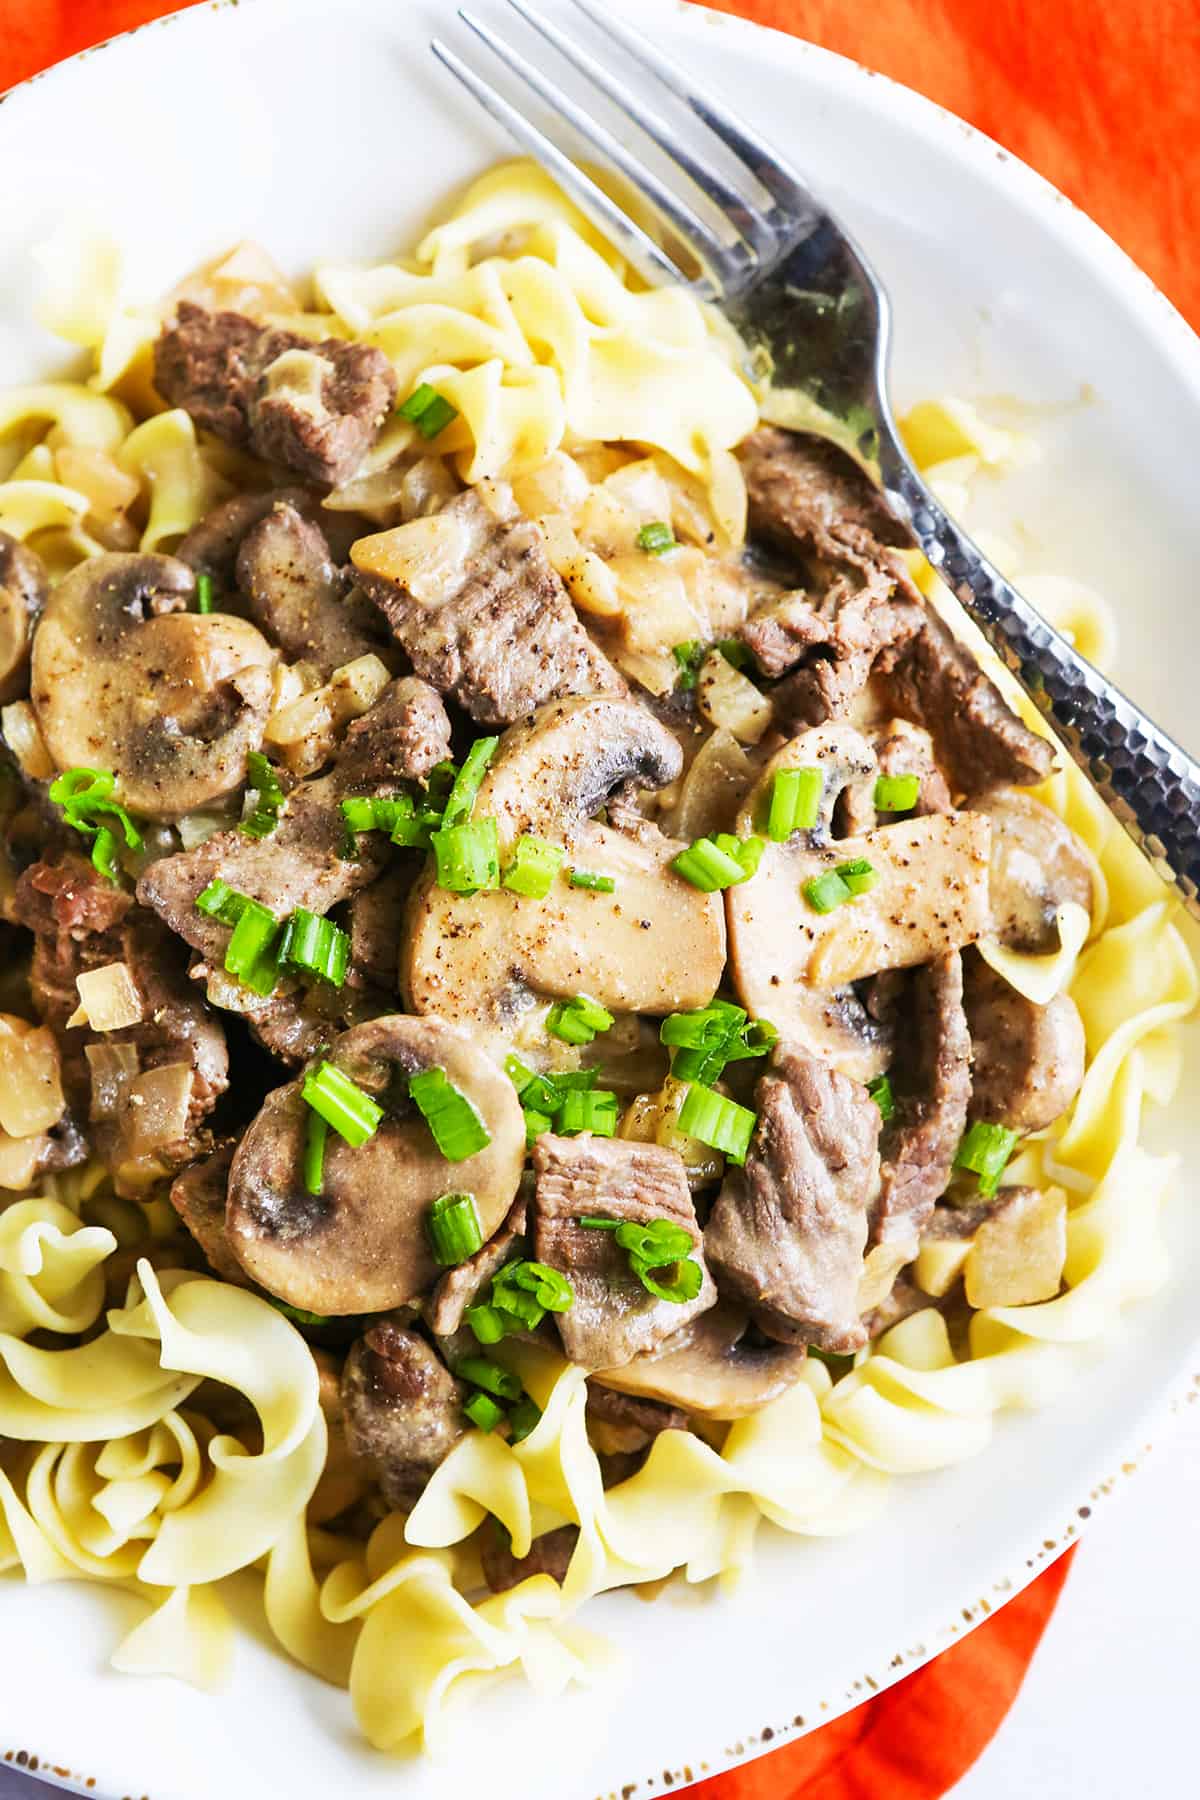 Top view of a heaping plate of beef stroganoff piled over noodles.